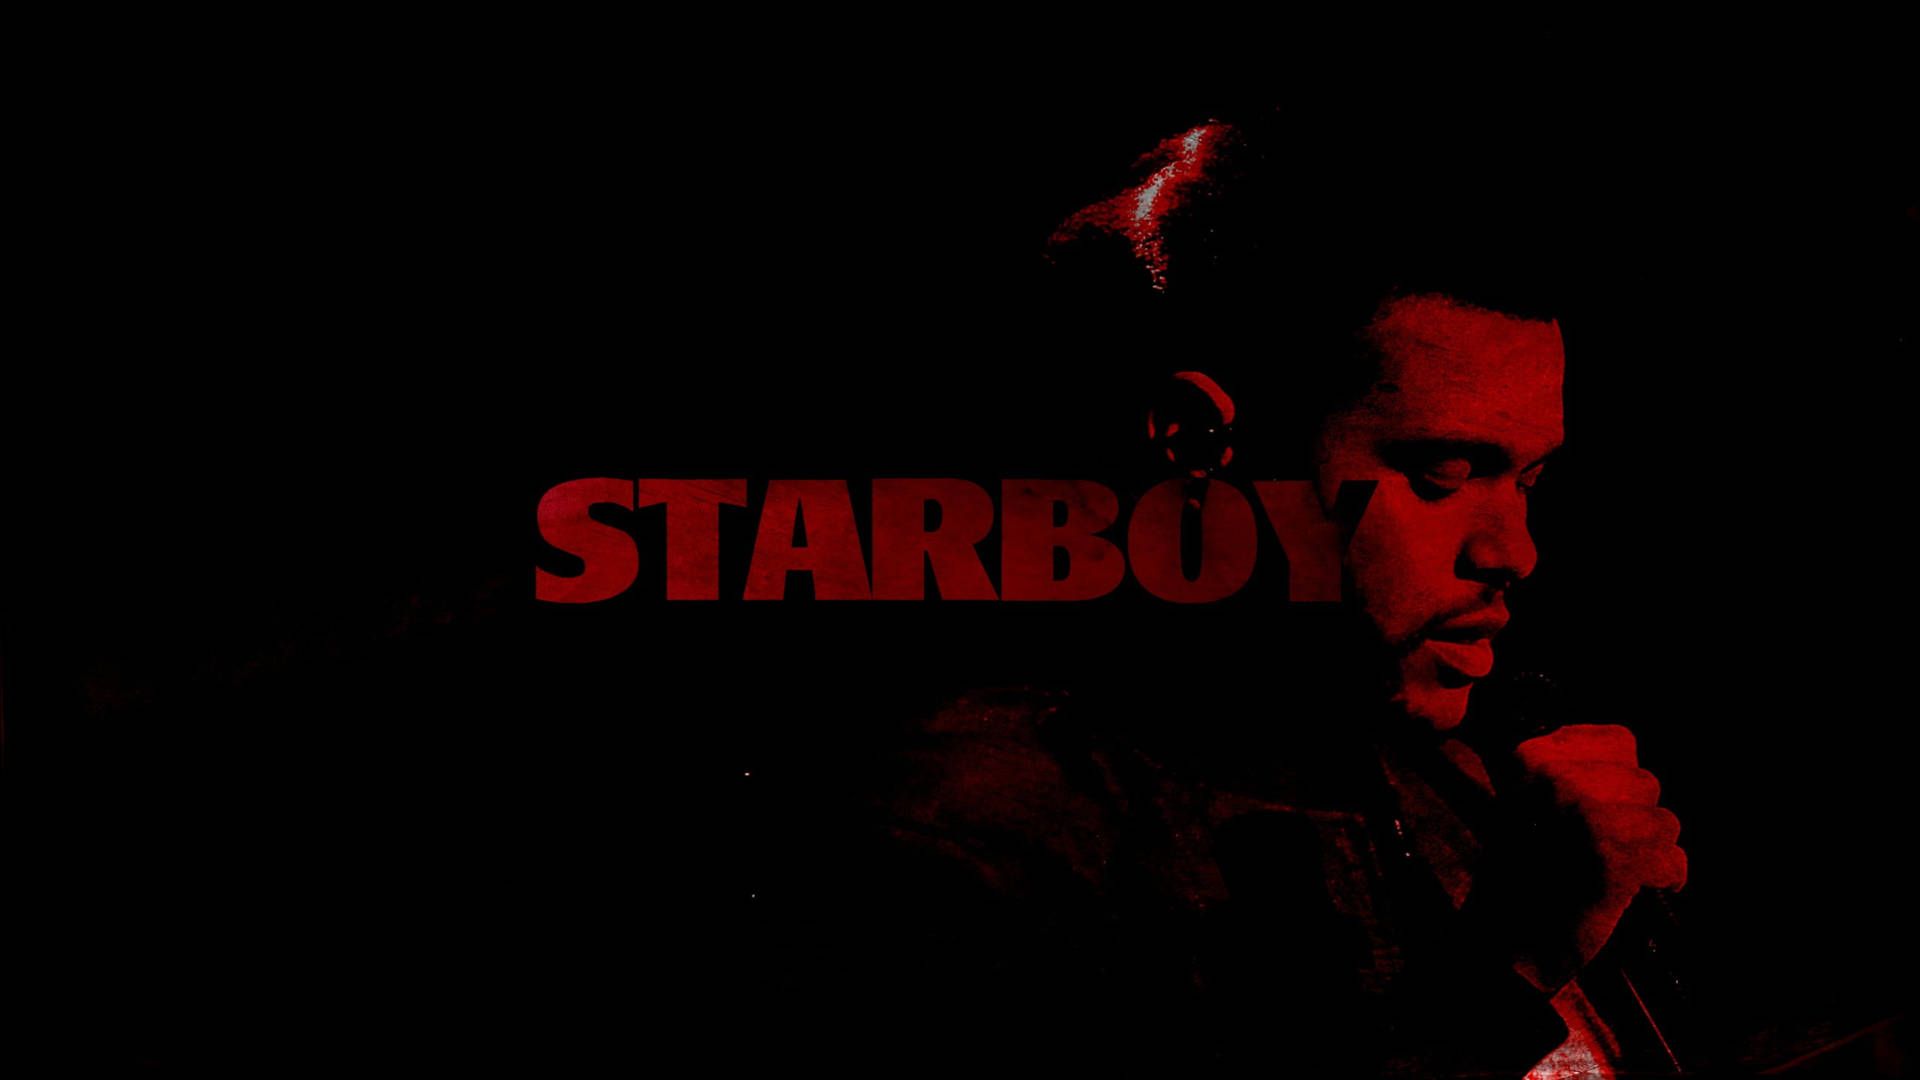 Free The Weeknd Wallpaper Downloads, The Weeknd Wallpaper for FREE